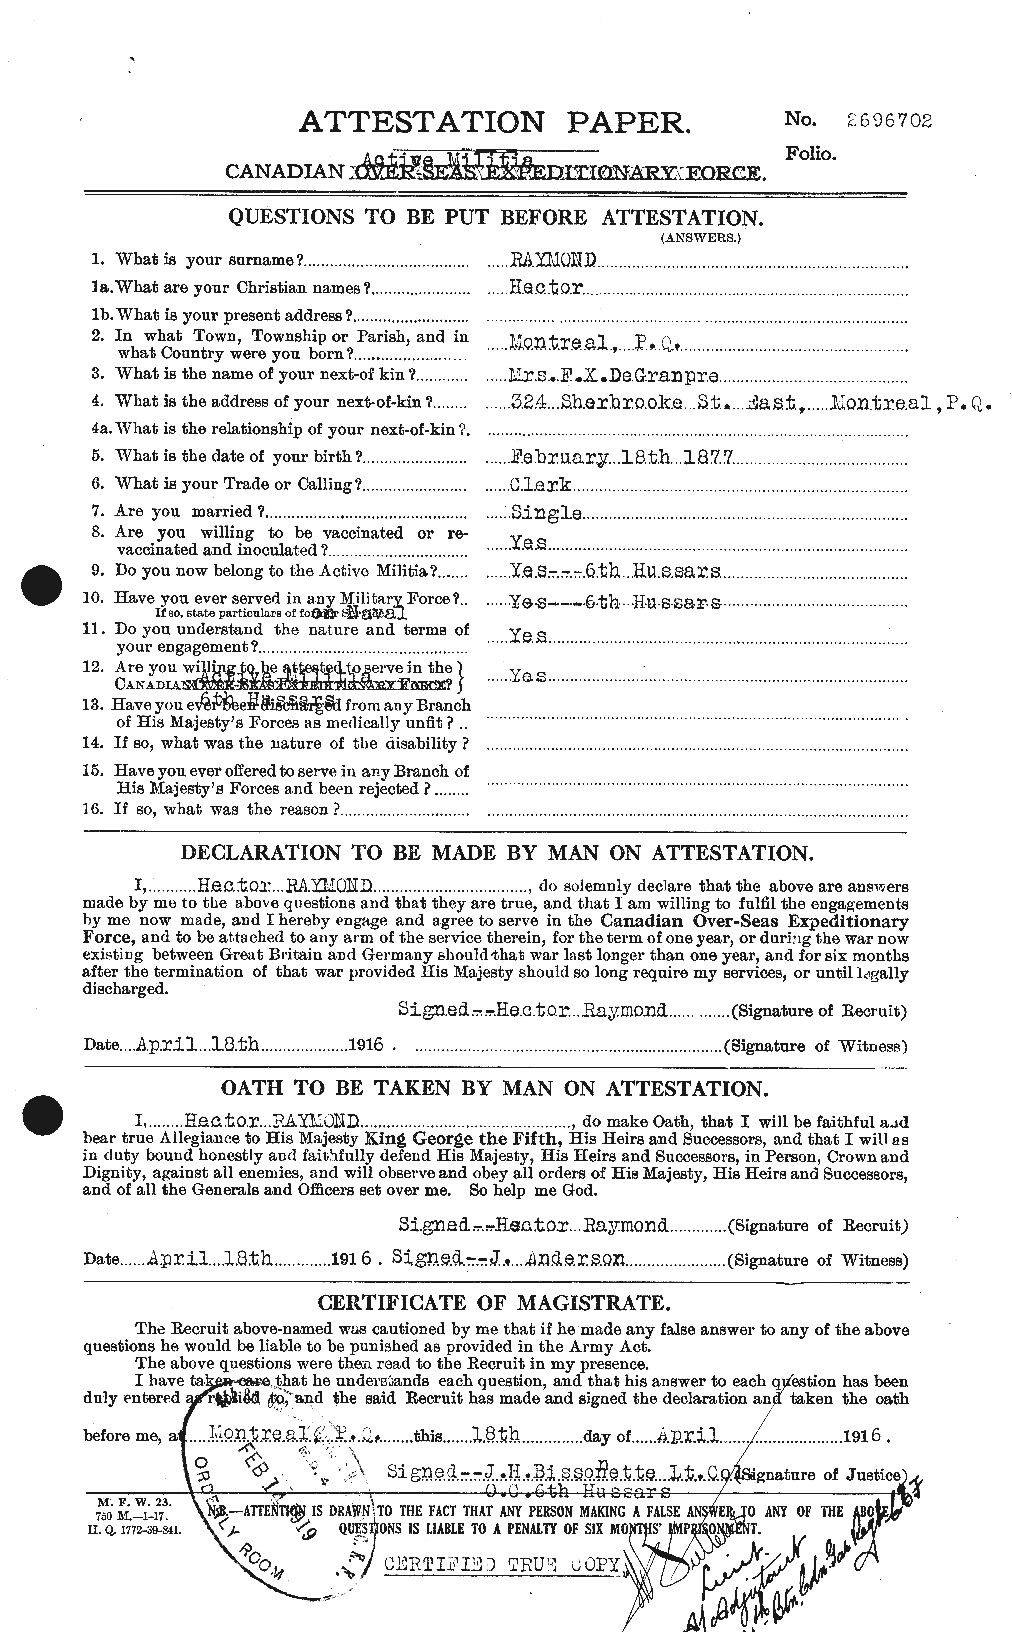 Personnel Records of the First World War - CEF 595353a